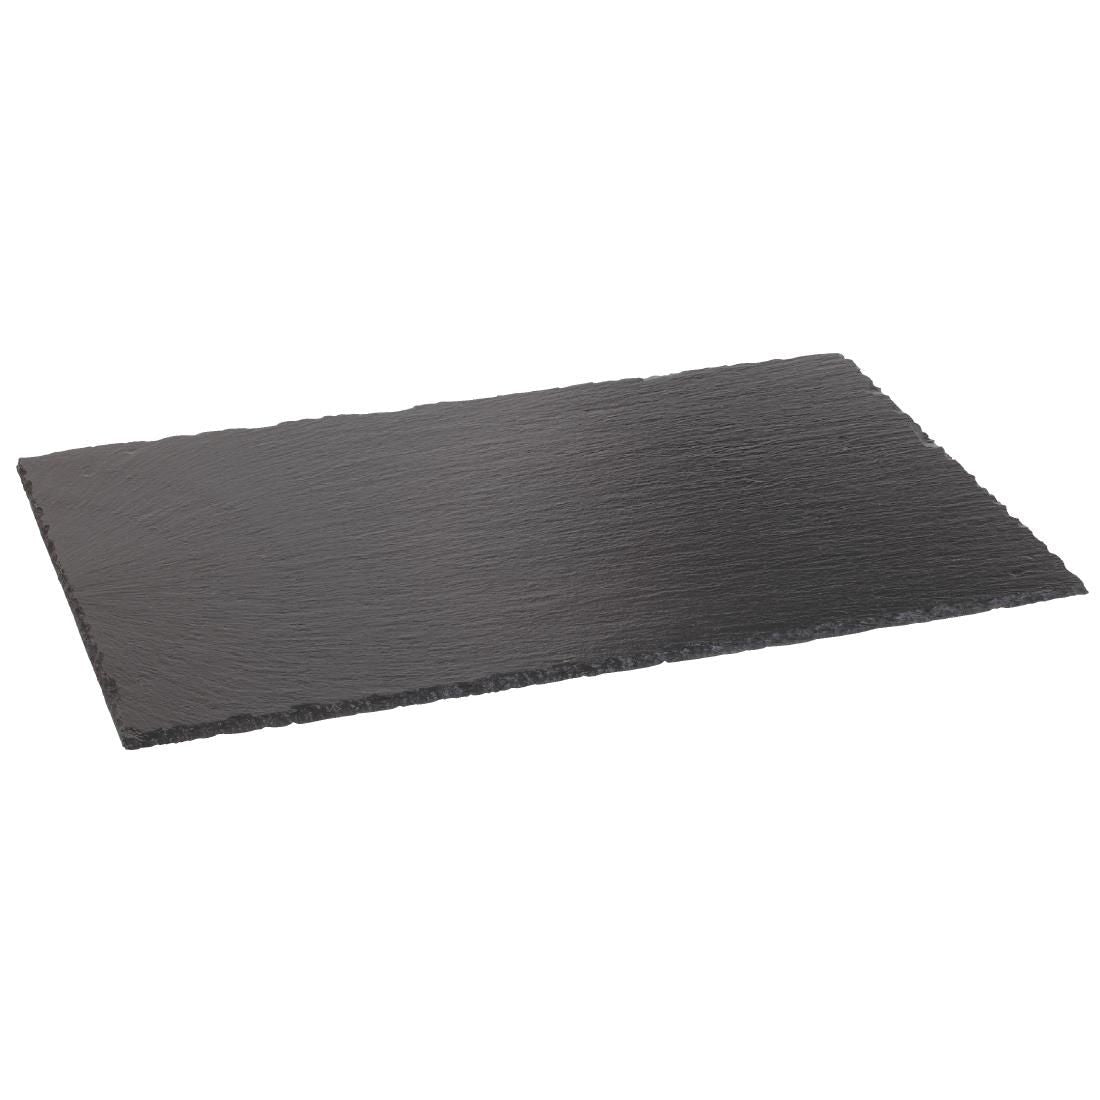 Olympia Natural Slate Boards GN 1/4 (Pack of 2)